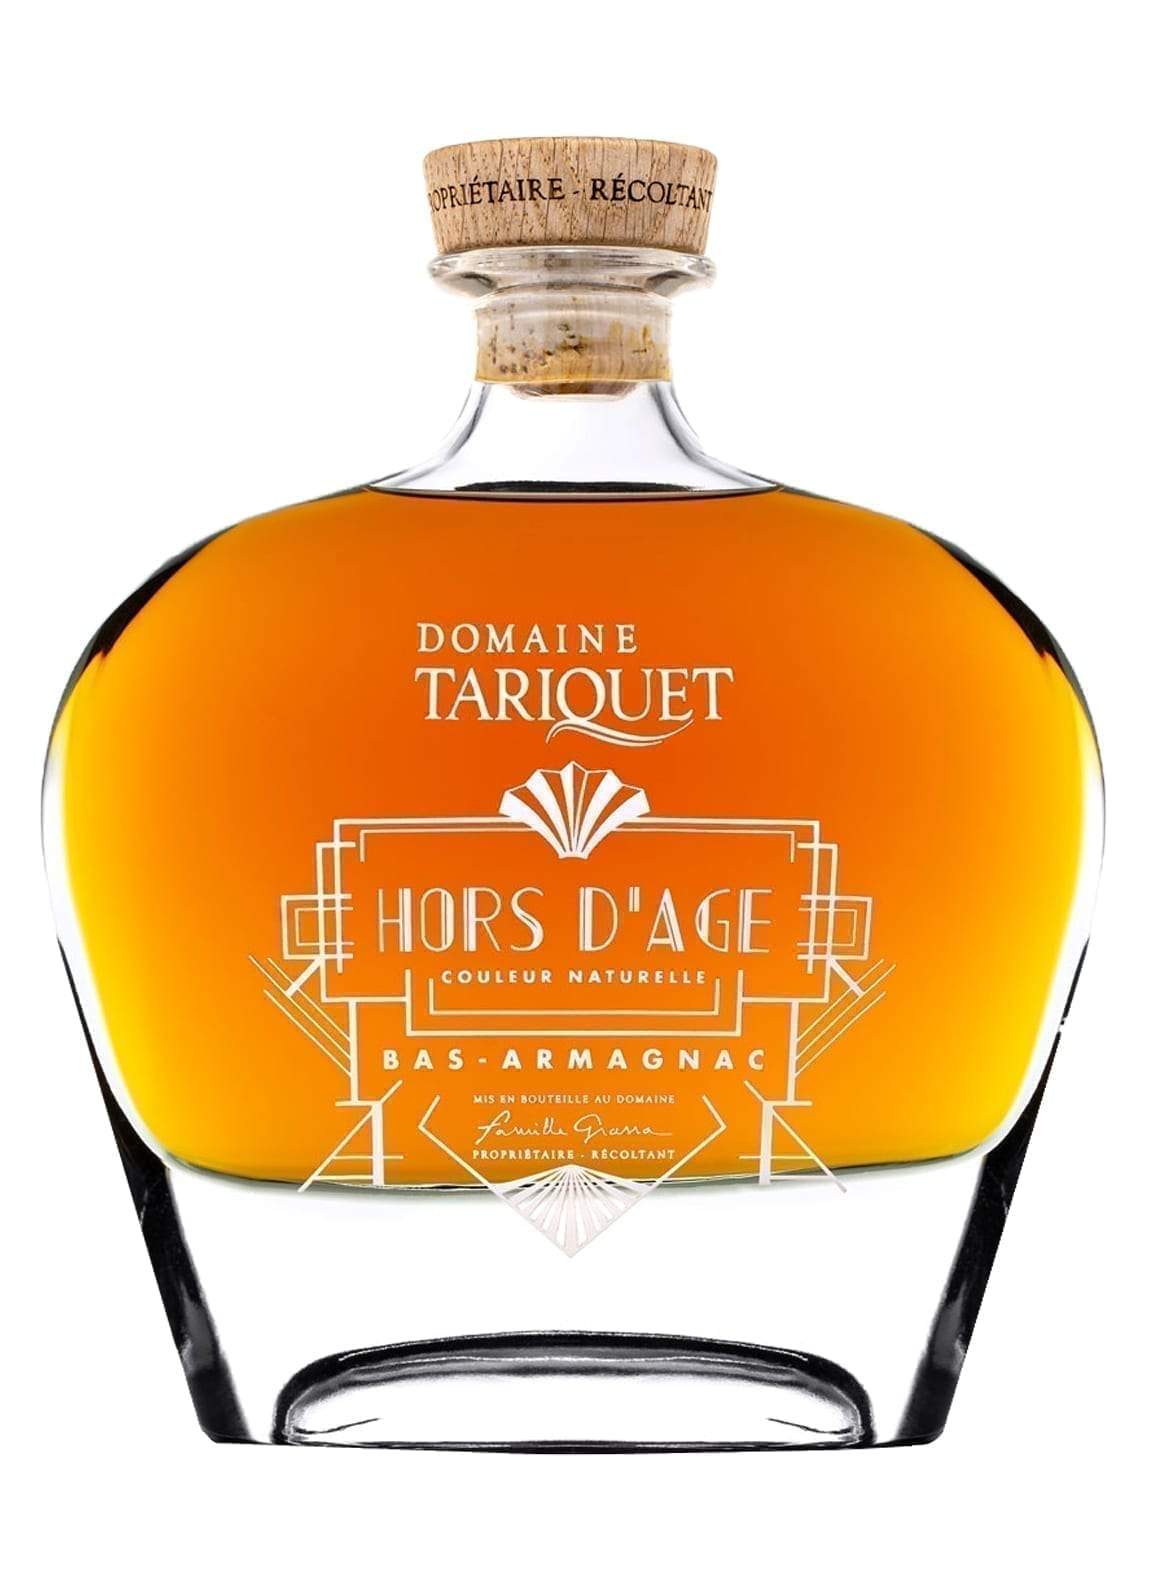 Chateau Tariquet Hors d'Age Bas Armagnac 15 Years Carafe 40% 700ml | Brandy | Shop online at Spirits of France